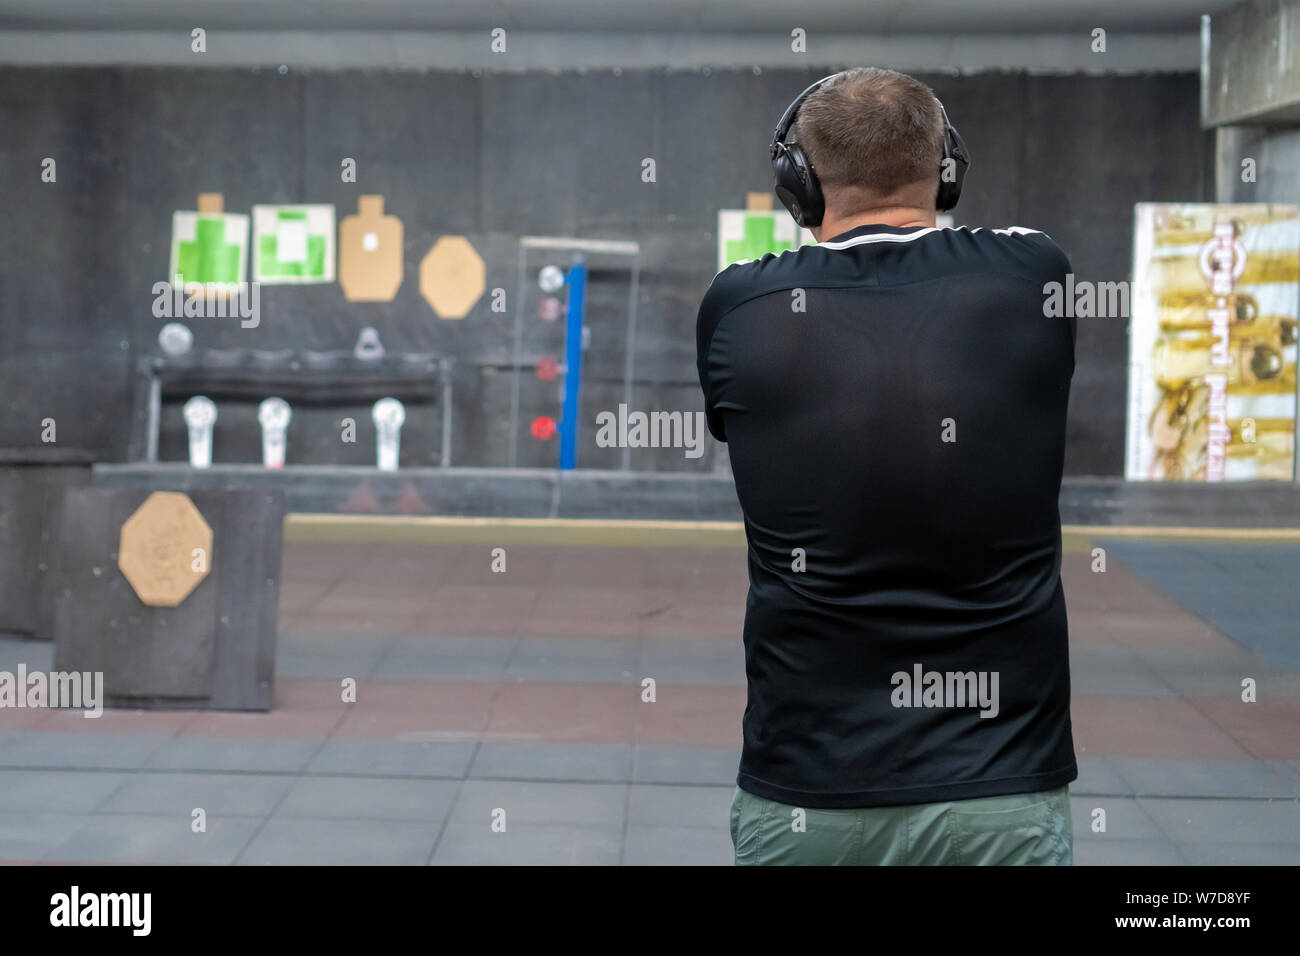 Man in shooting range in shooting action with GLOCK 19, view from behind o holding a pistol taking aim away from the camera with shallow depth of fiel Stock Photo